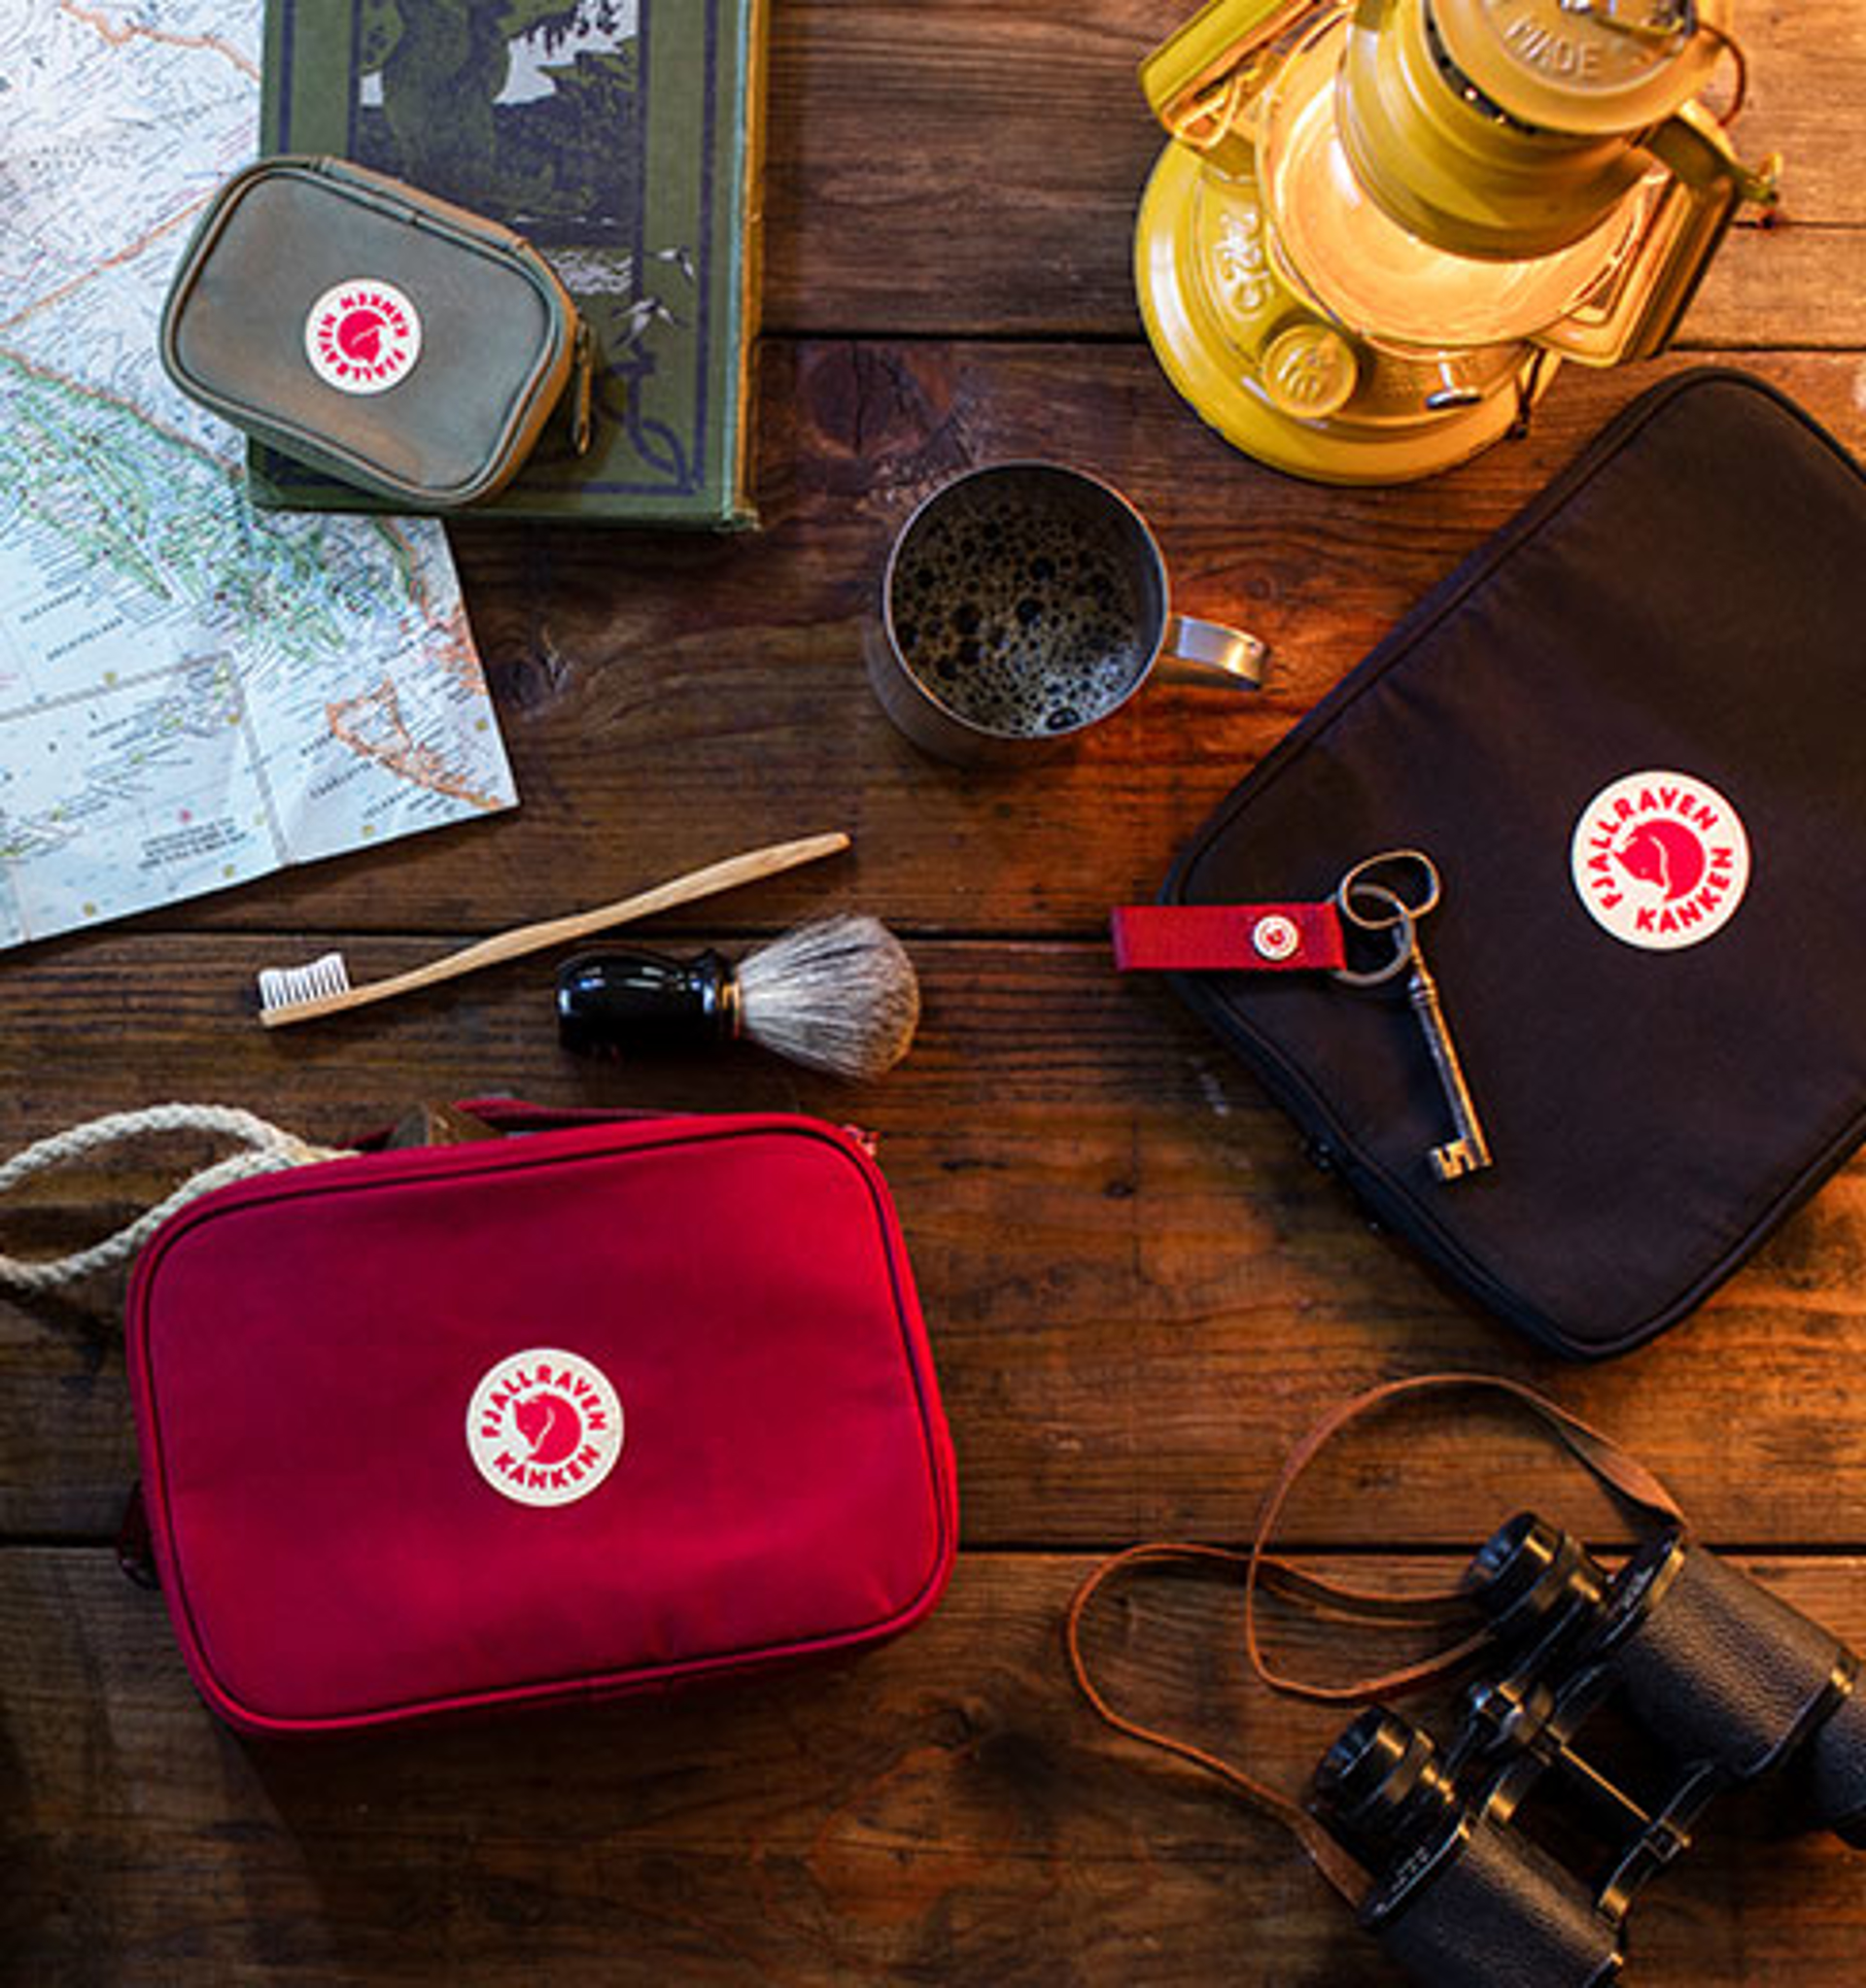 fjallraven kanken accessory bags with shaving brush, tooth brush, key, mug, lantern,  a book and a map on a table